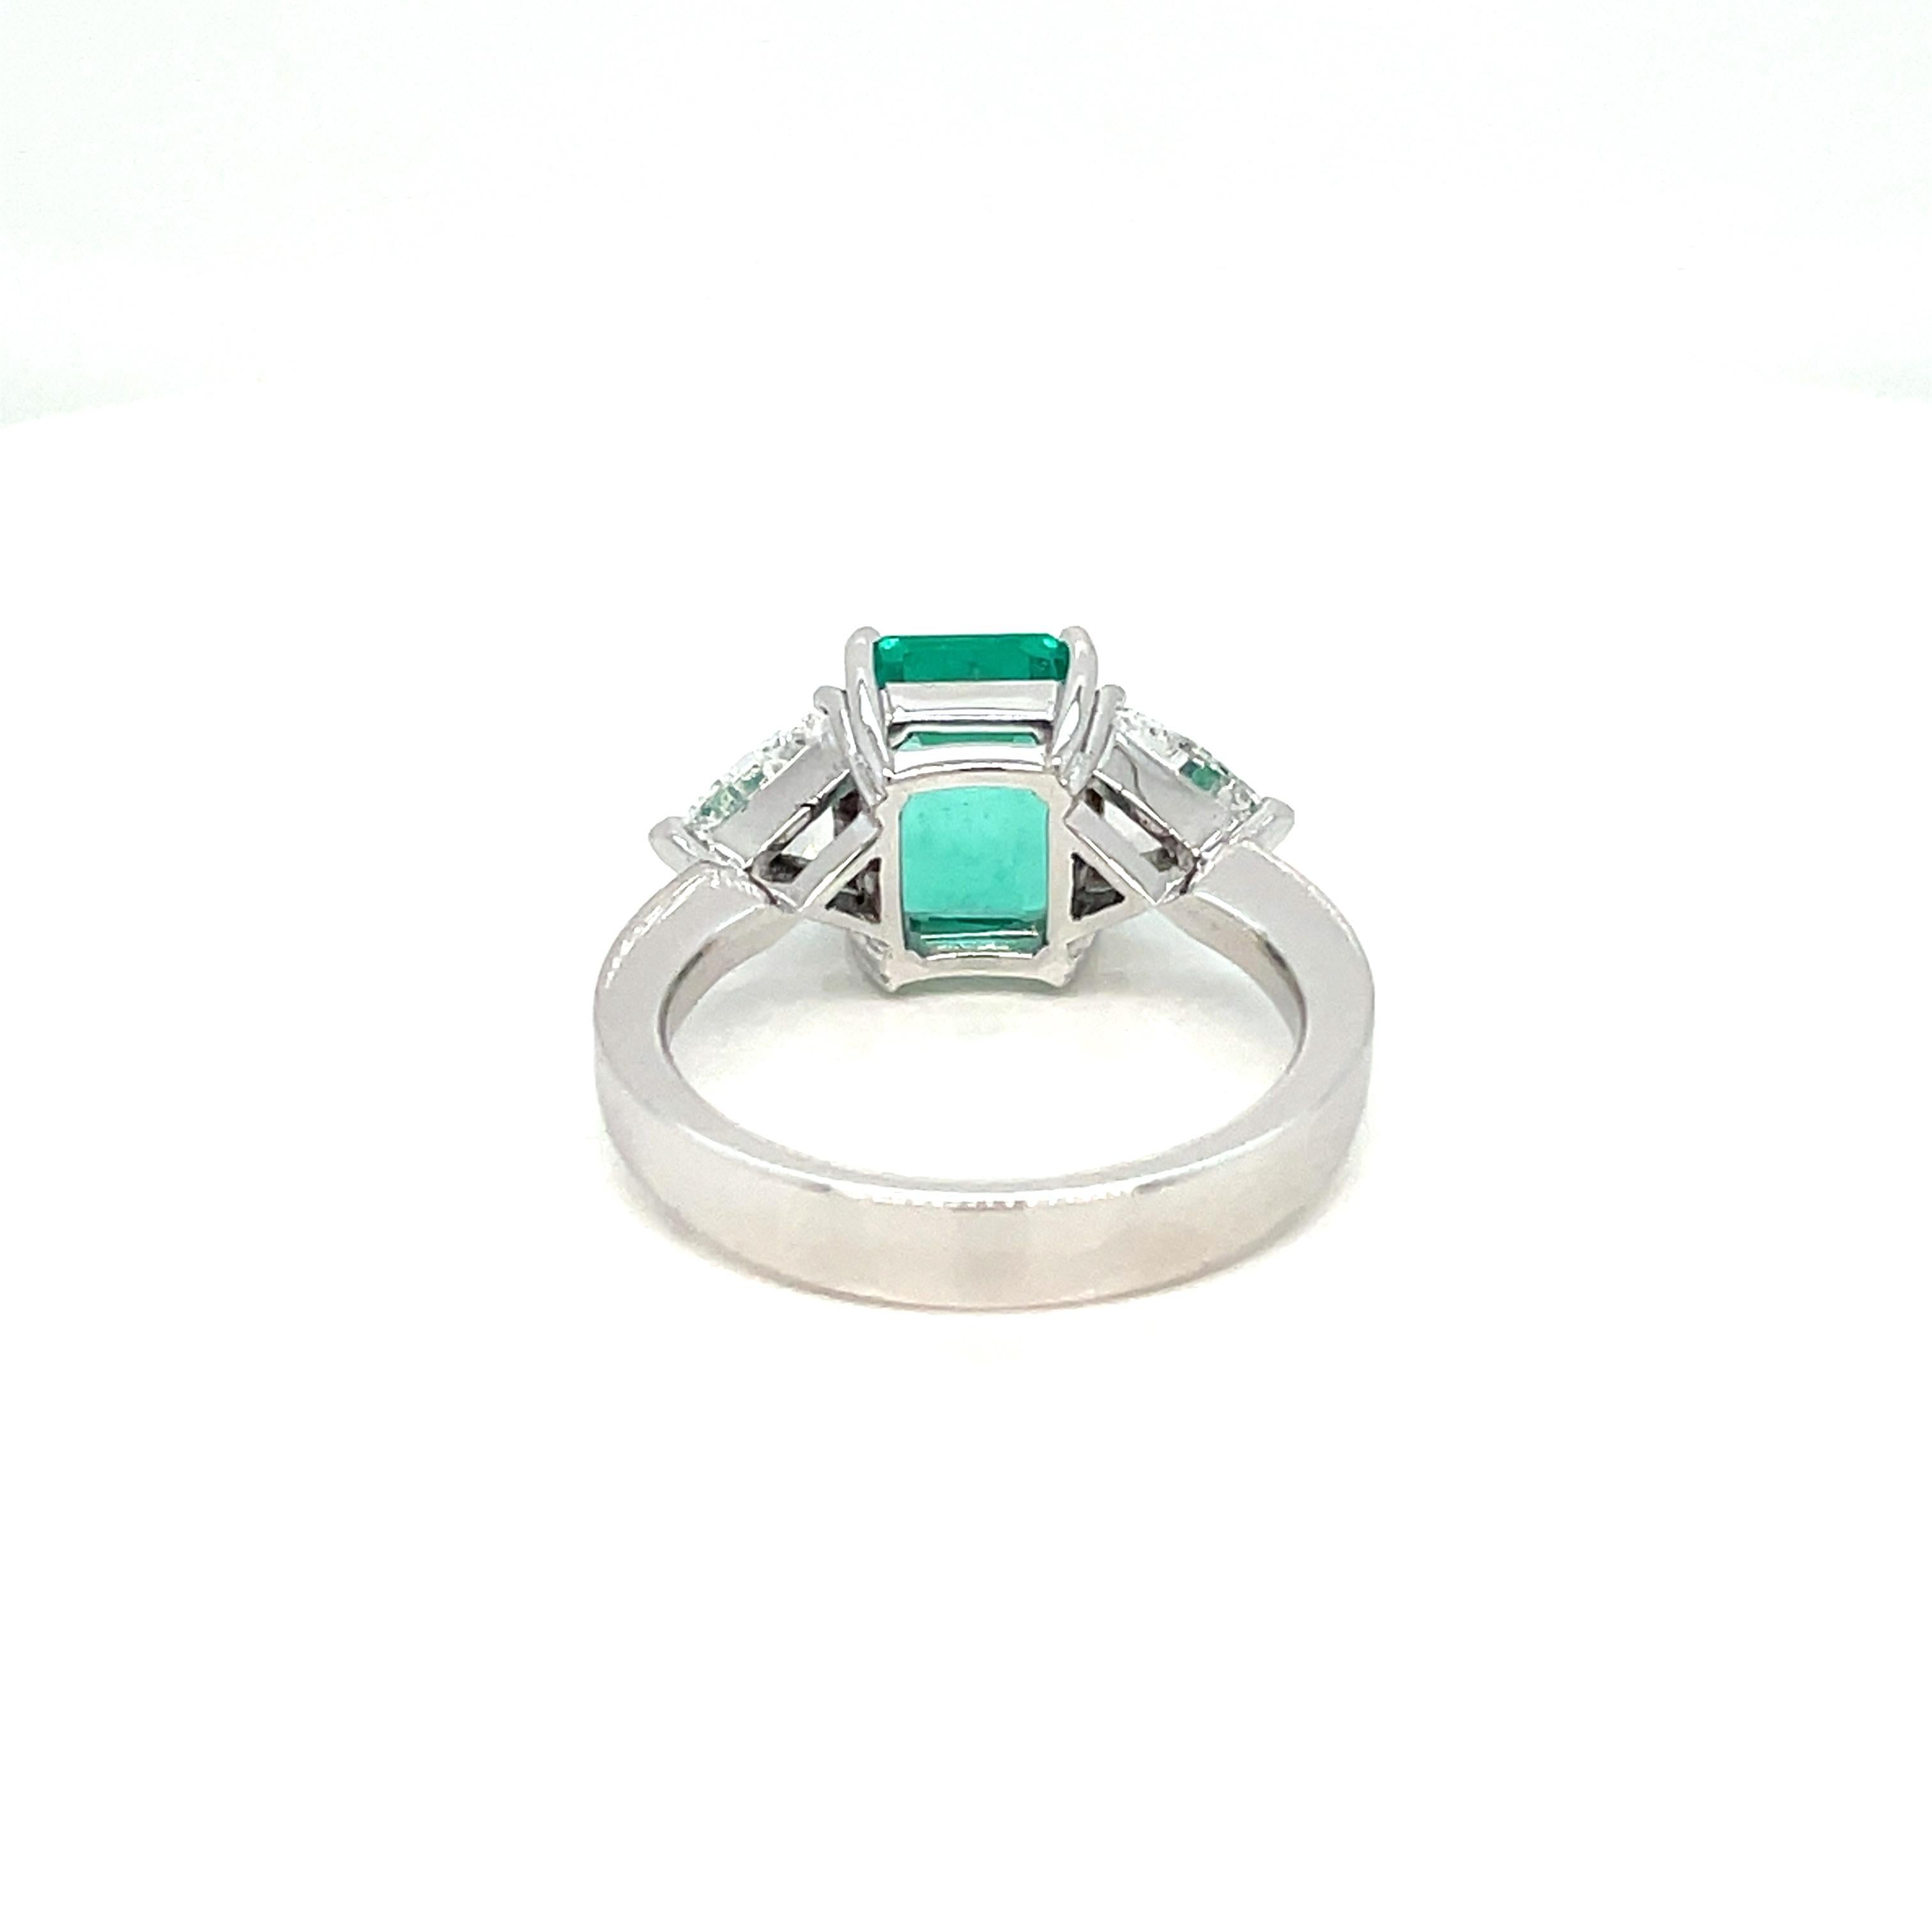 Certified 2.93 Carat Colombian Natural Emerald Diamond Ring 1